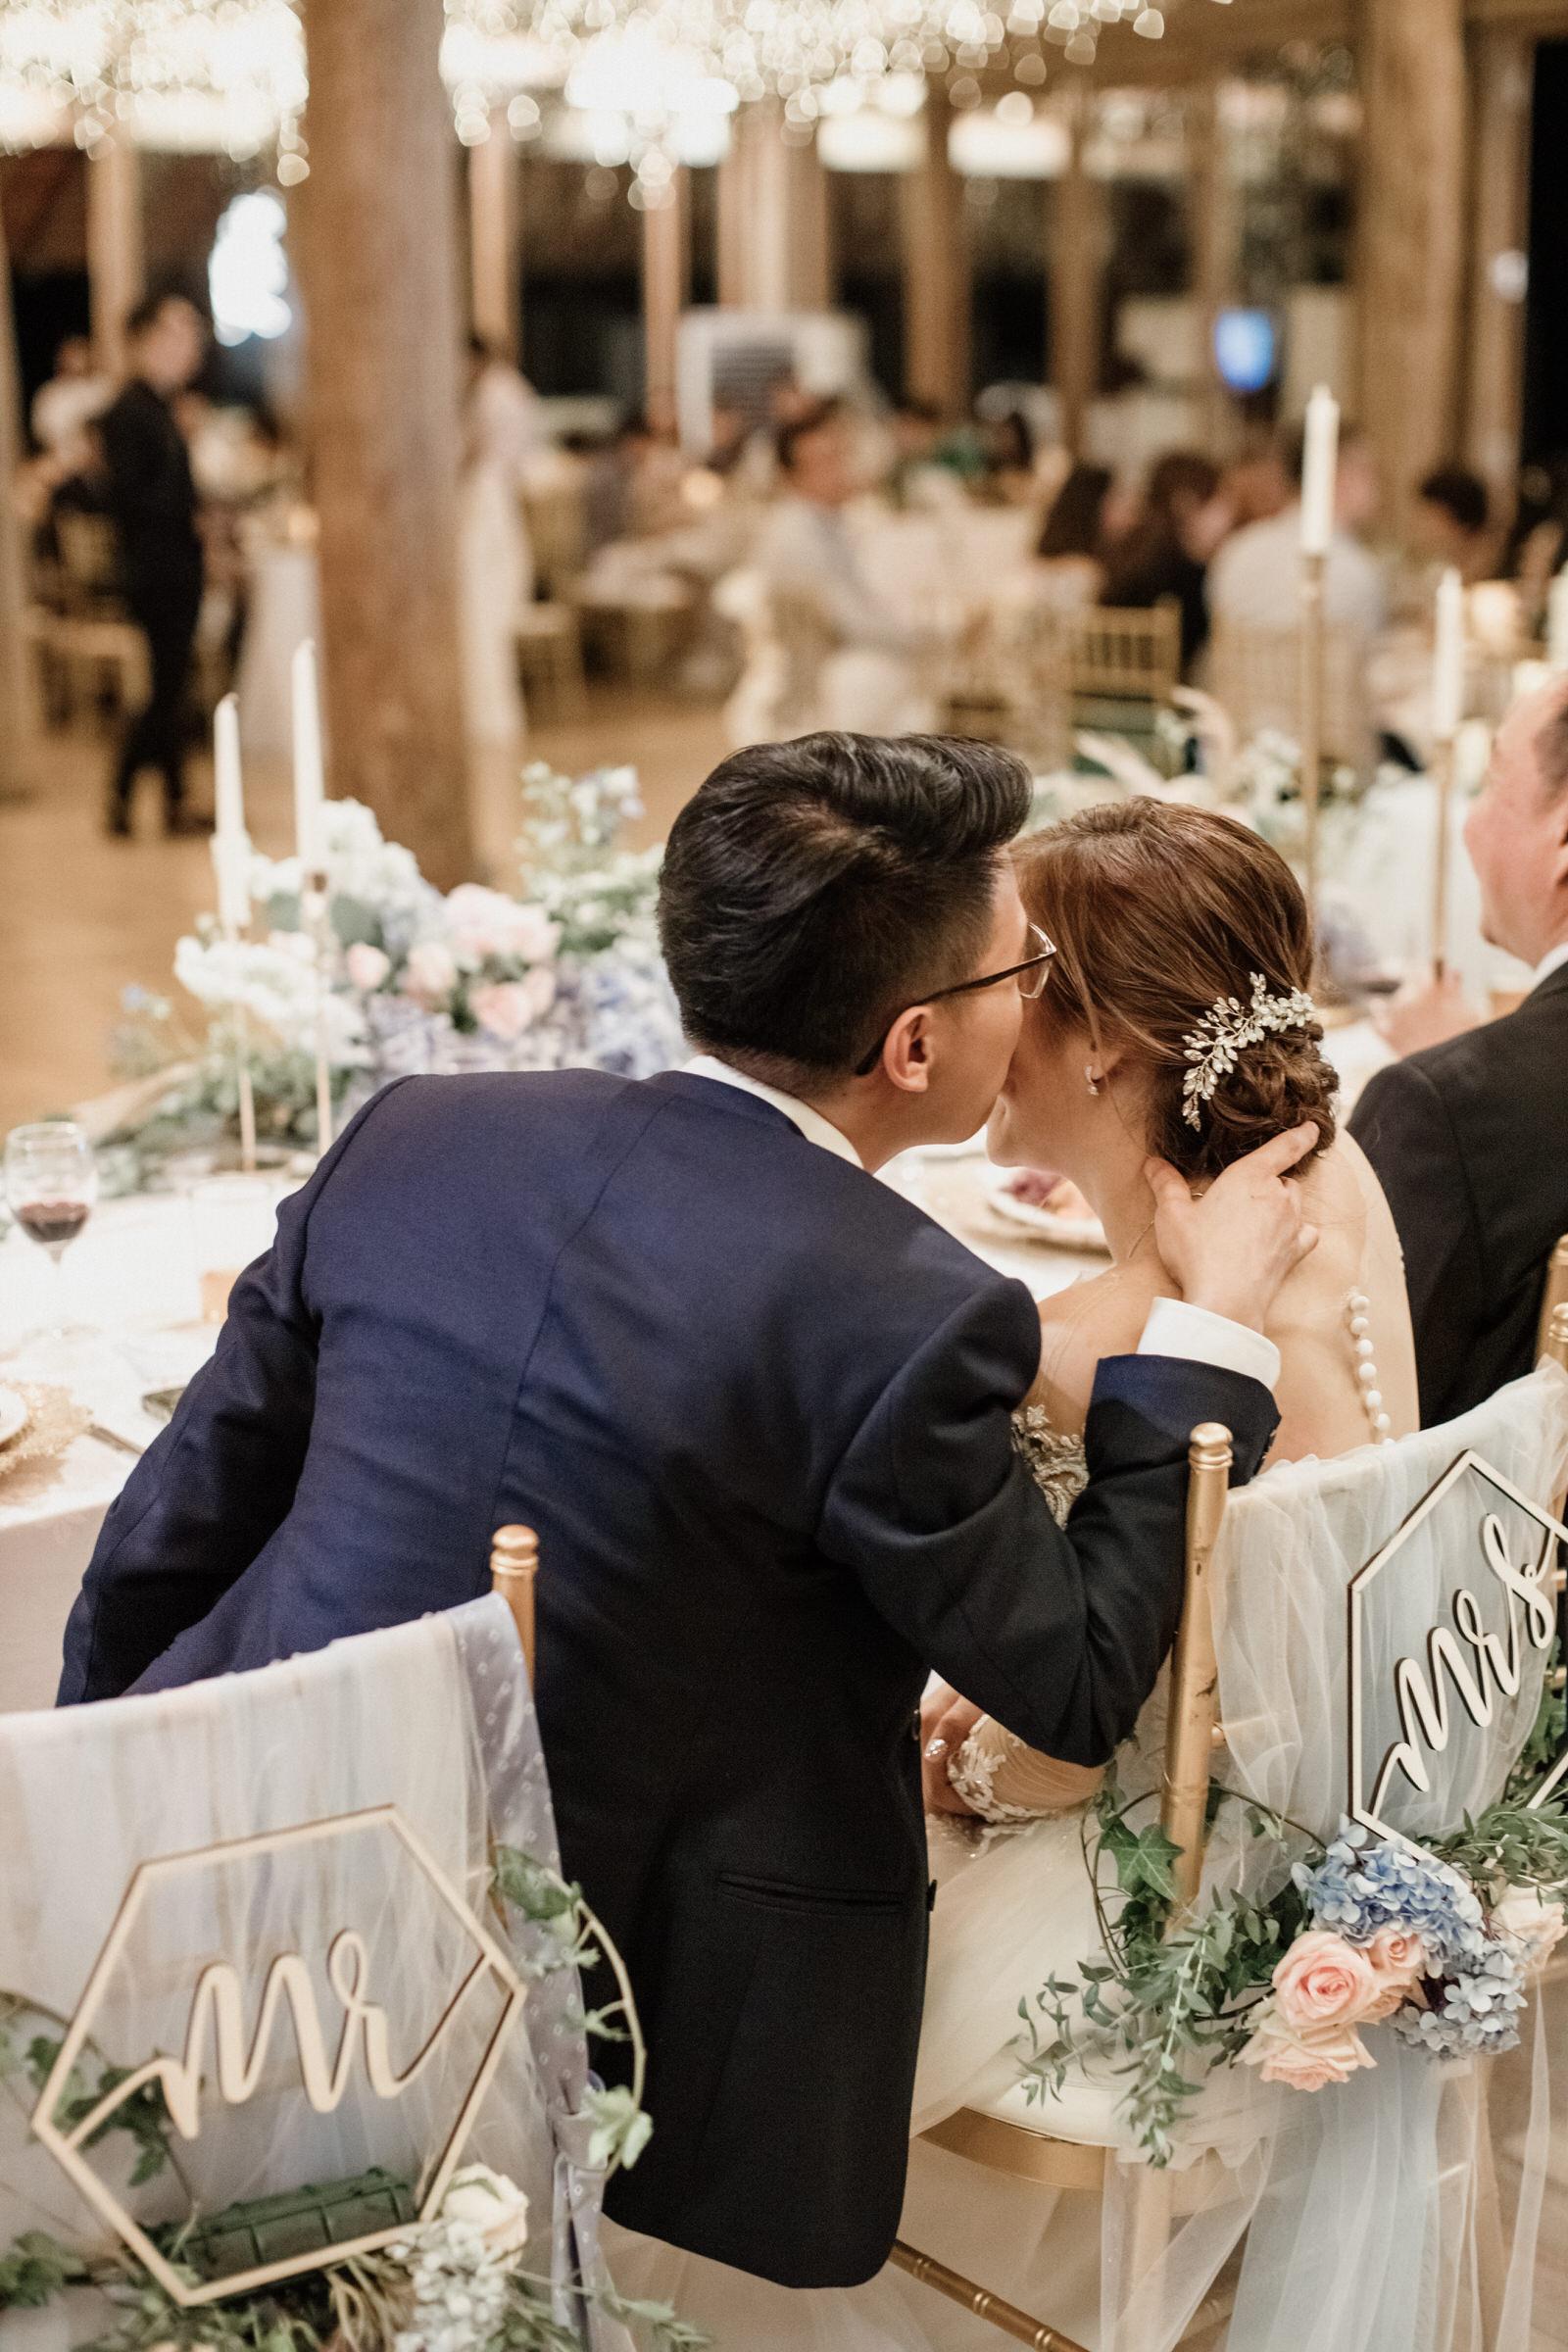 touching moments Tanarimba Gold and Rustic Garden Weding Janda baik Decoration wooden chair feather flowers Cliff Choong Photography